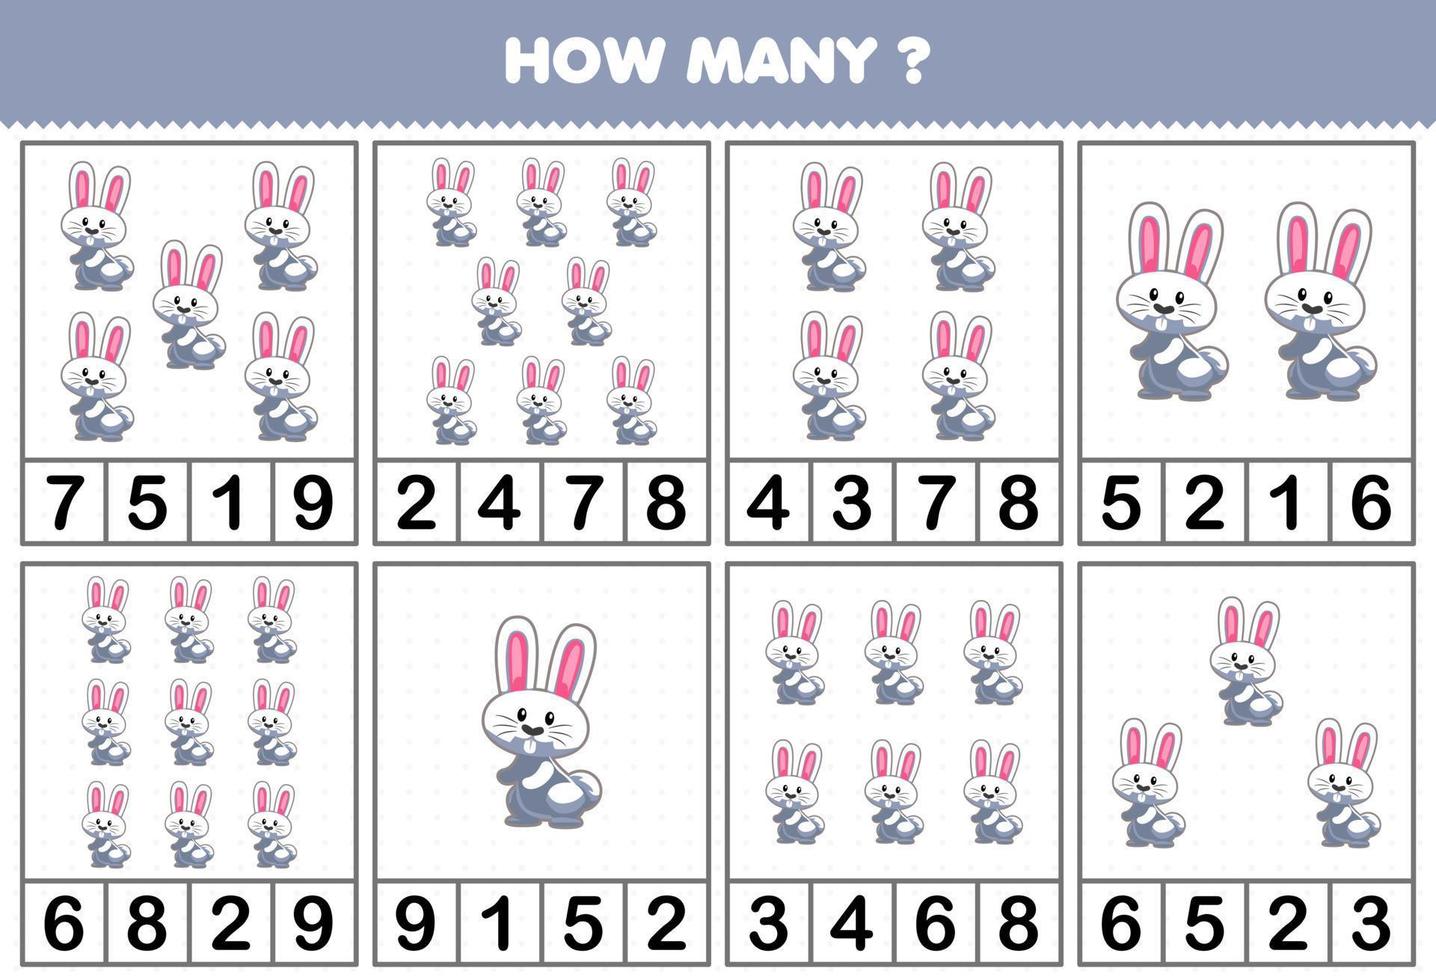 Education game for children counting how many objects in each table of cute cartoon rabbit animal printable worksheet vector